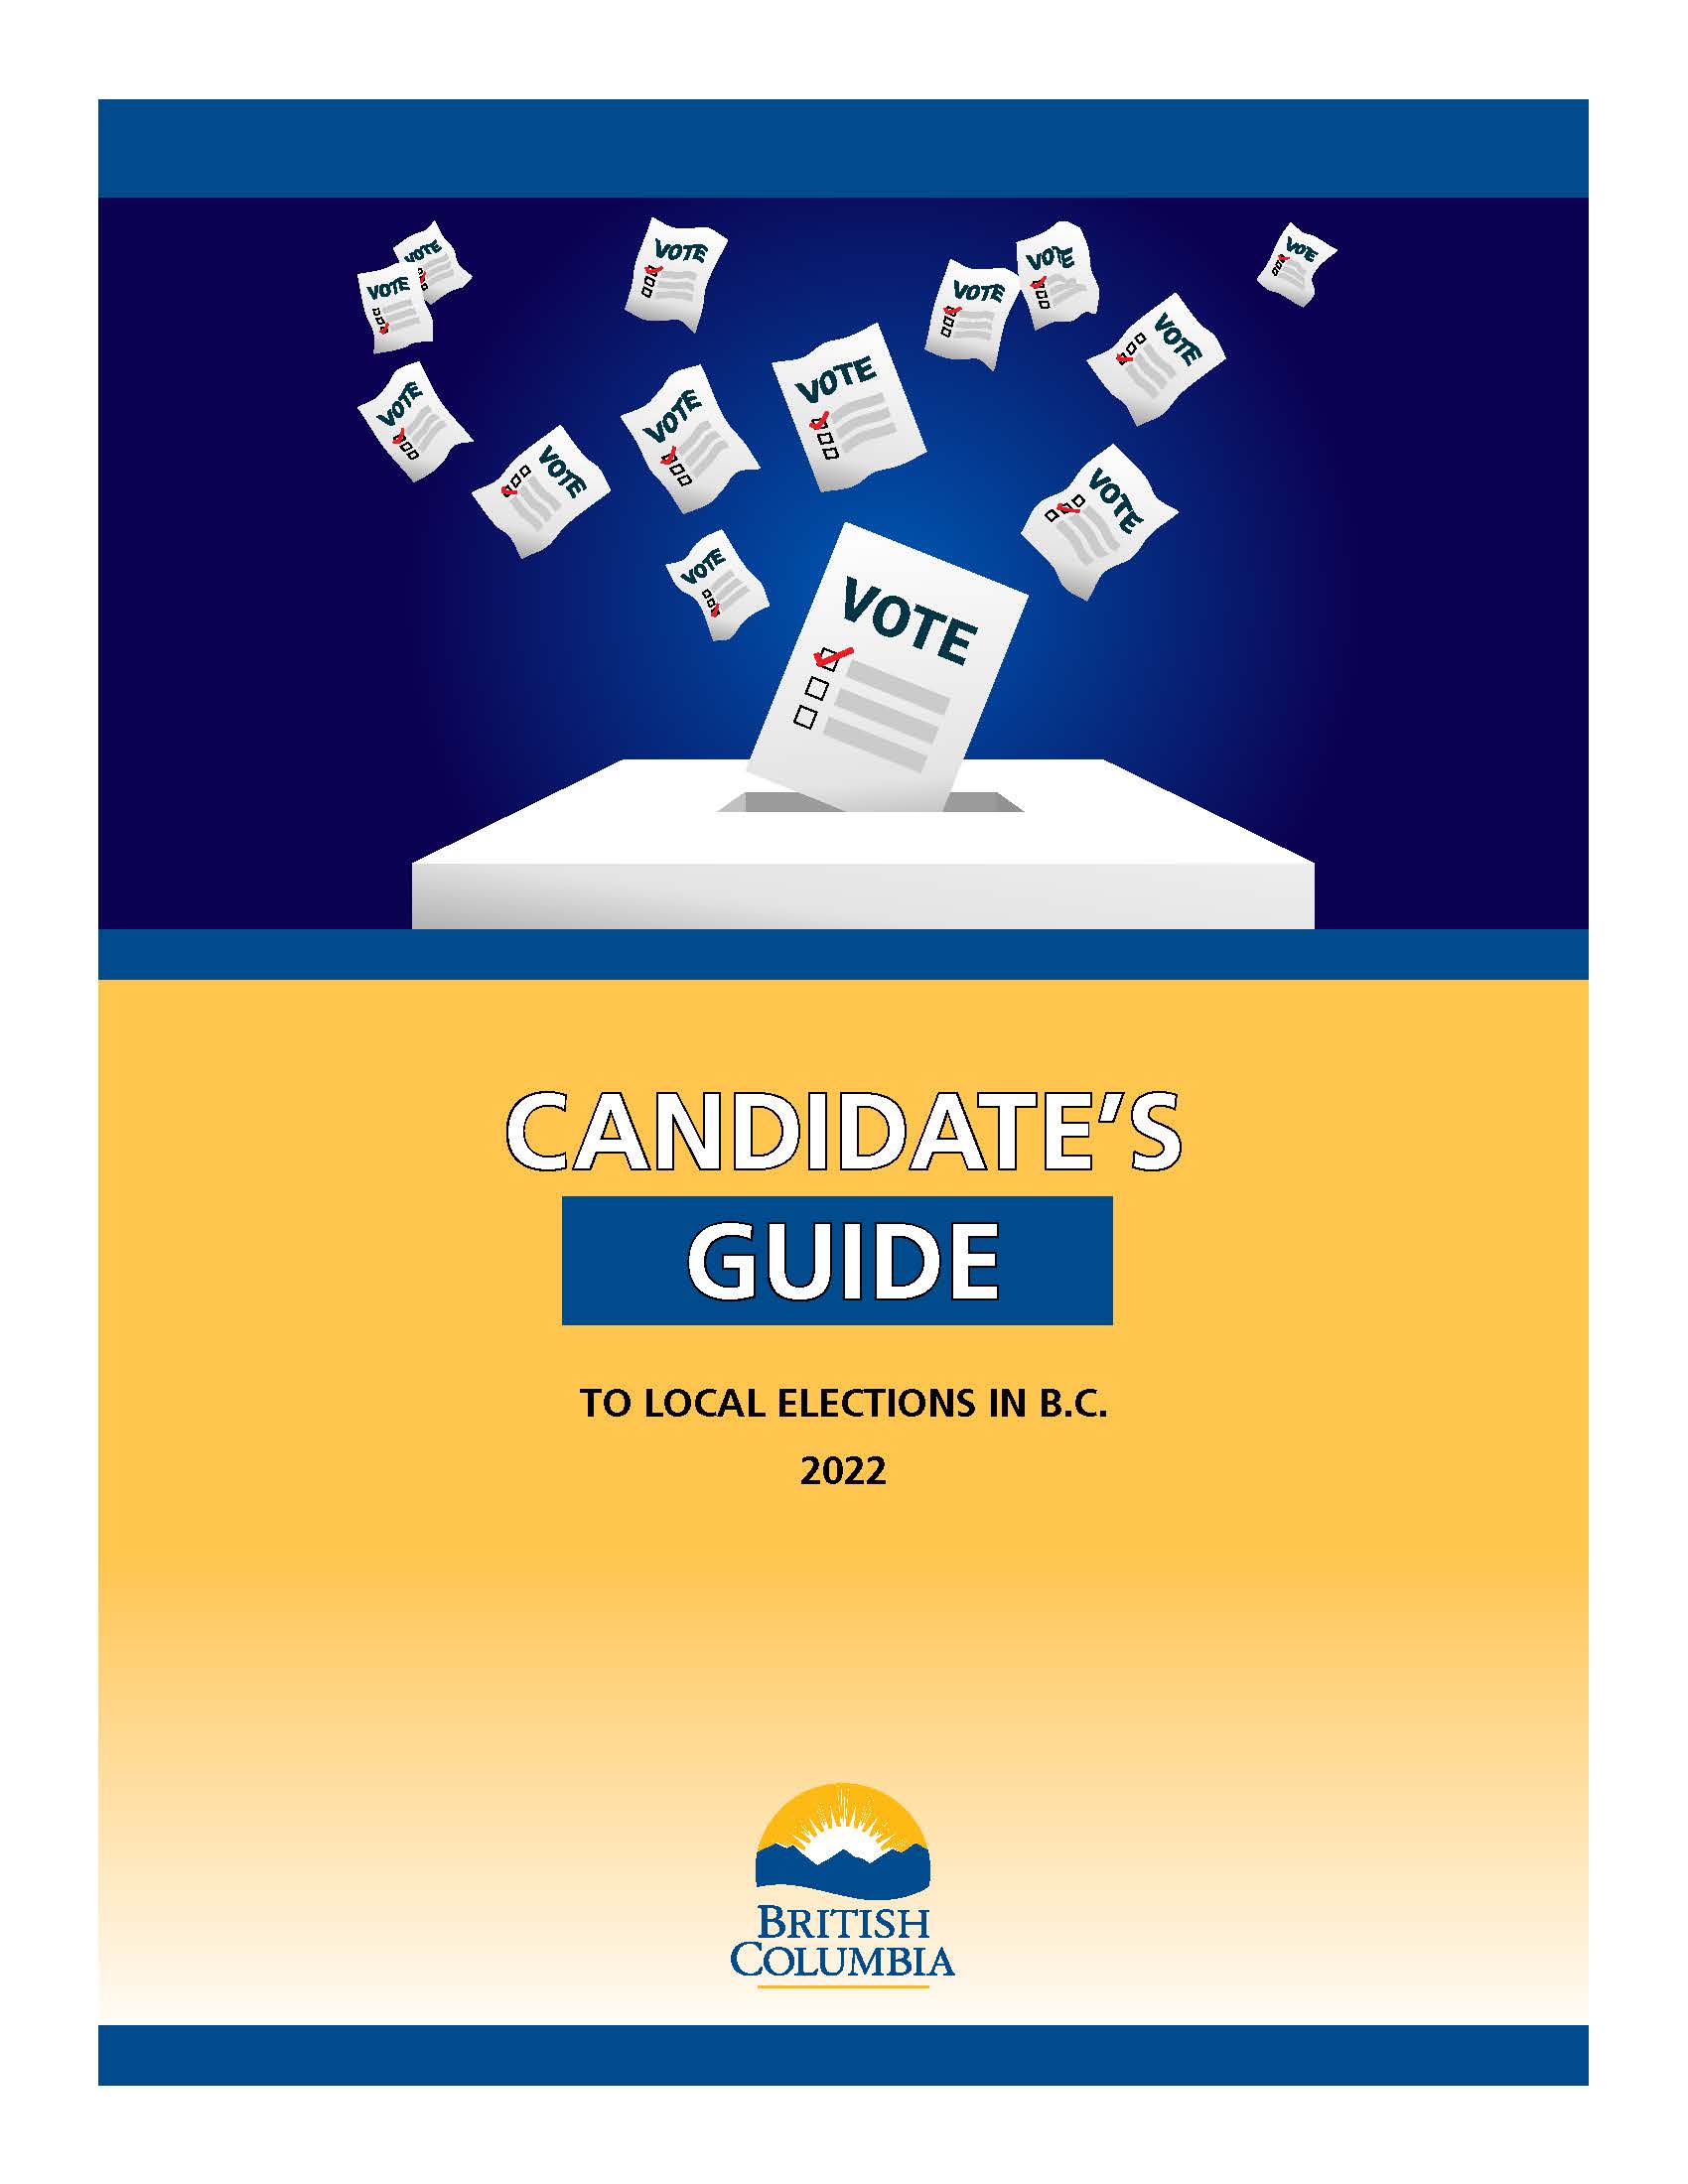 Cover Page of the Candidates Guide